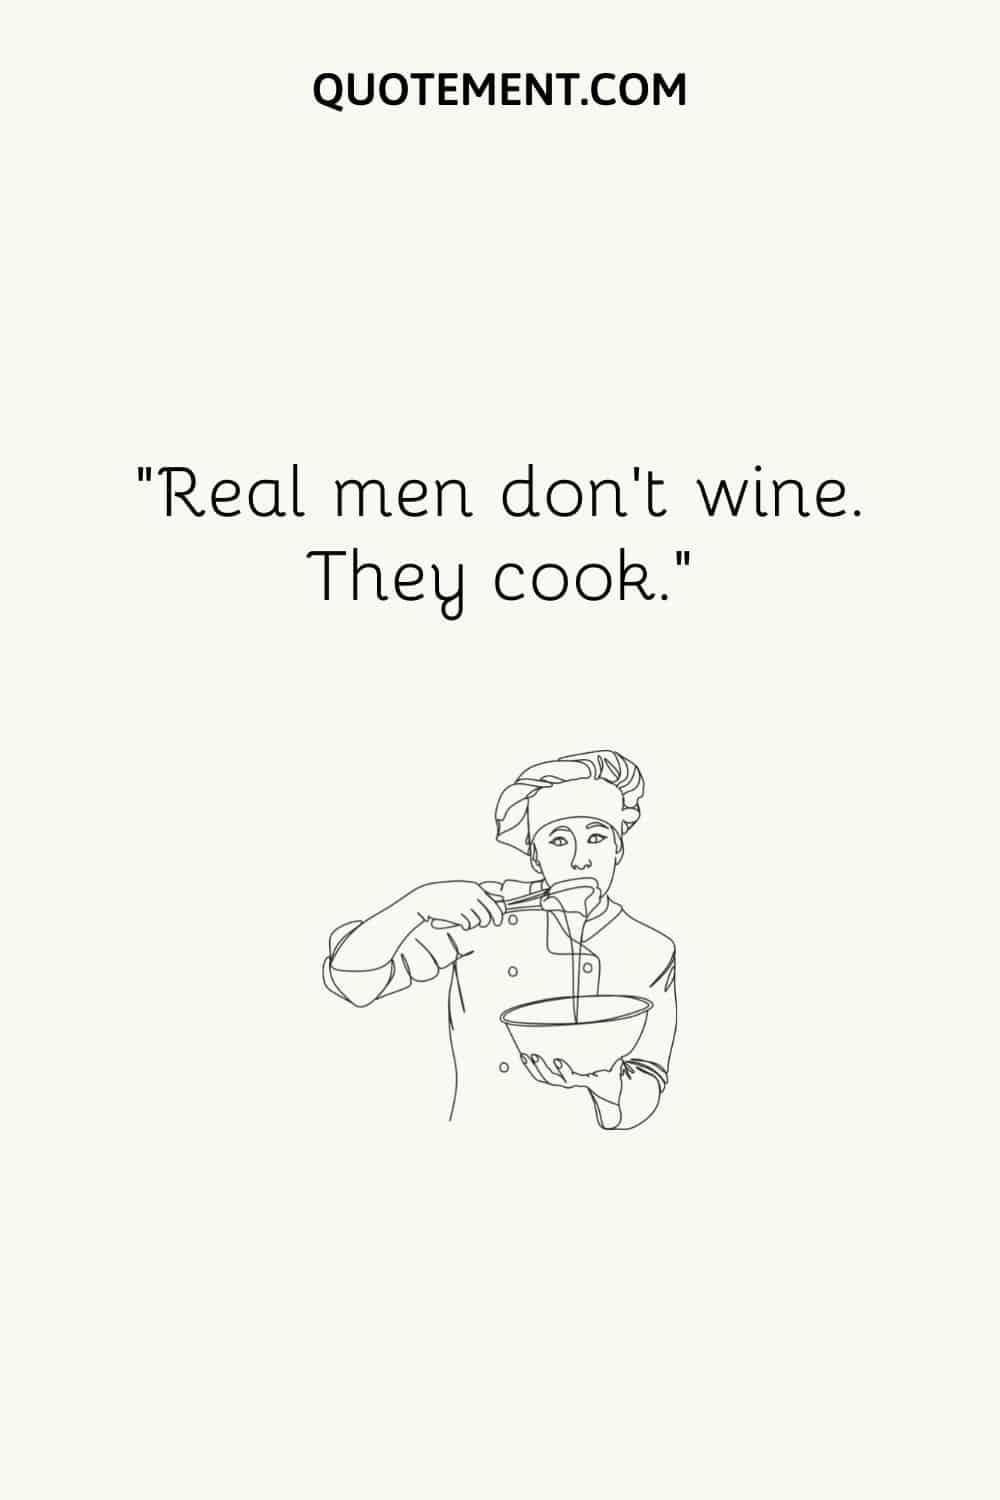 Real men don’t wine. They cook